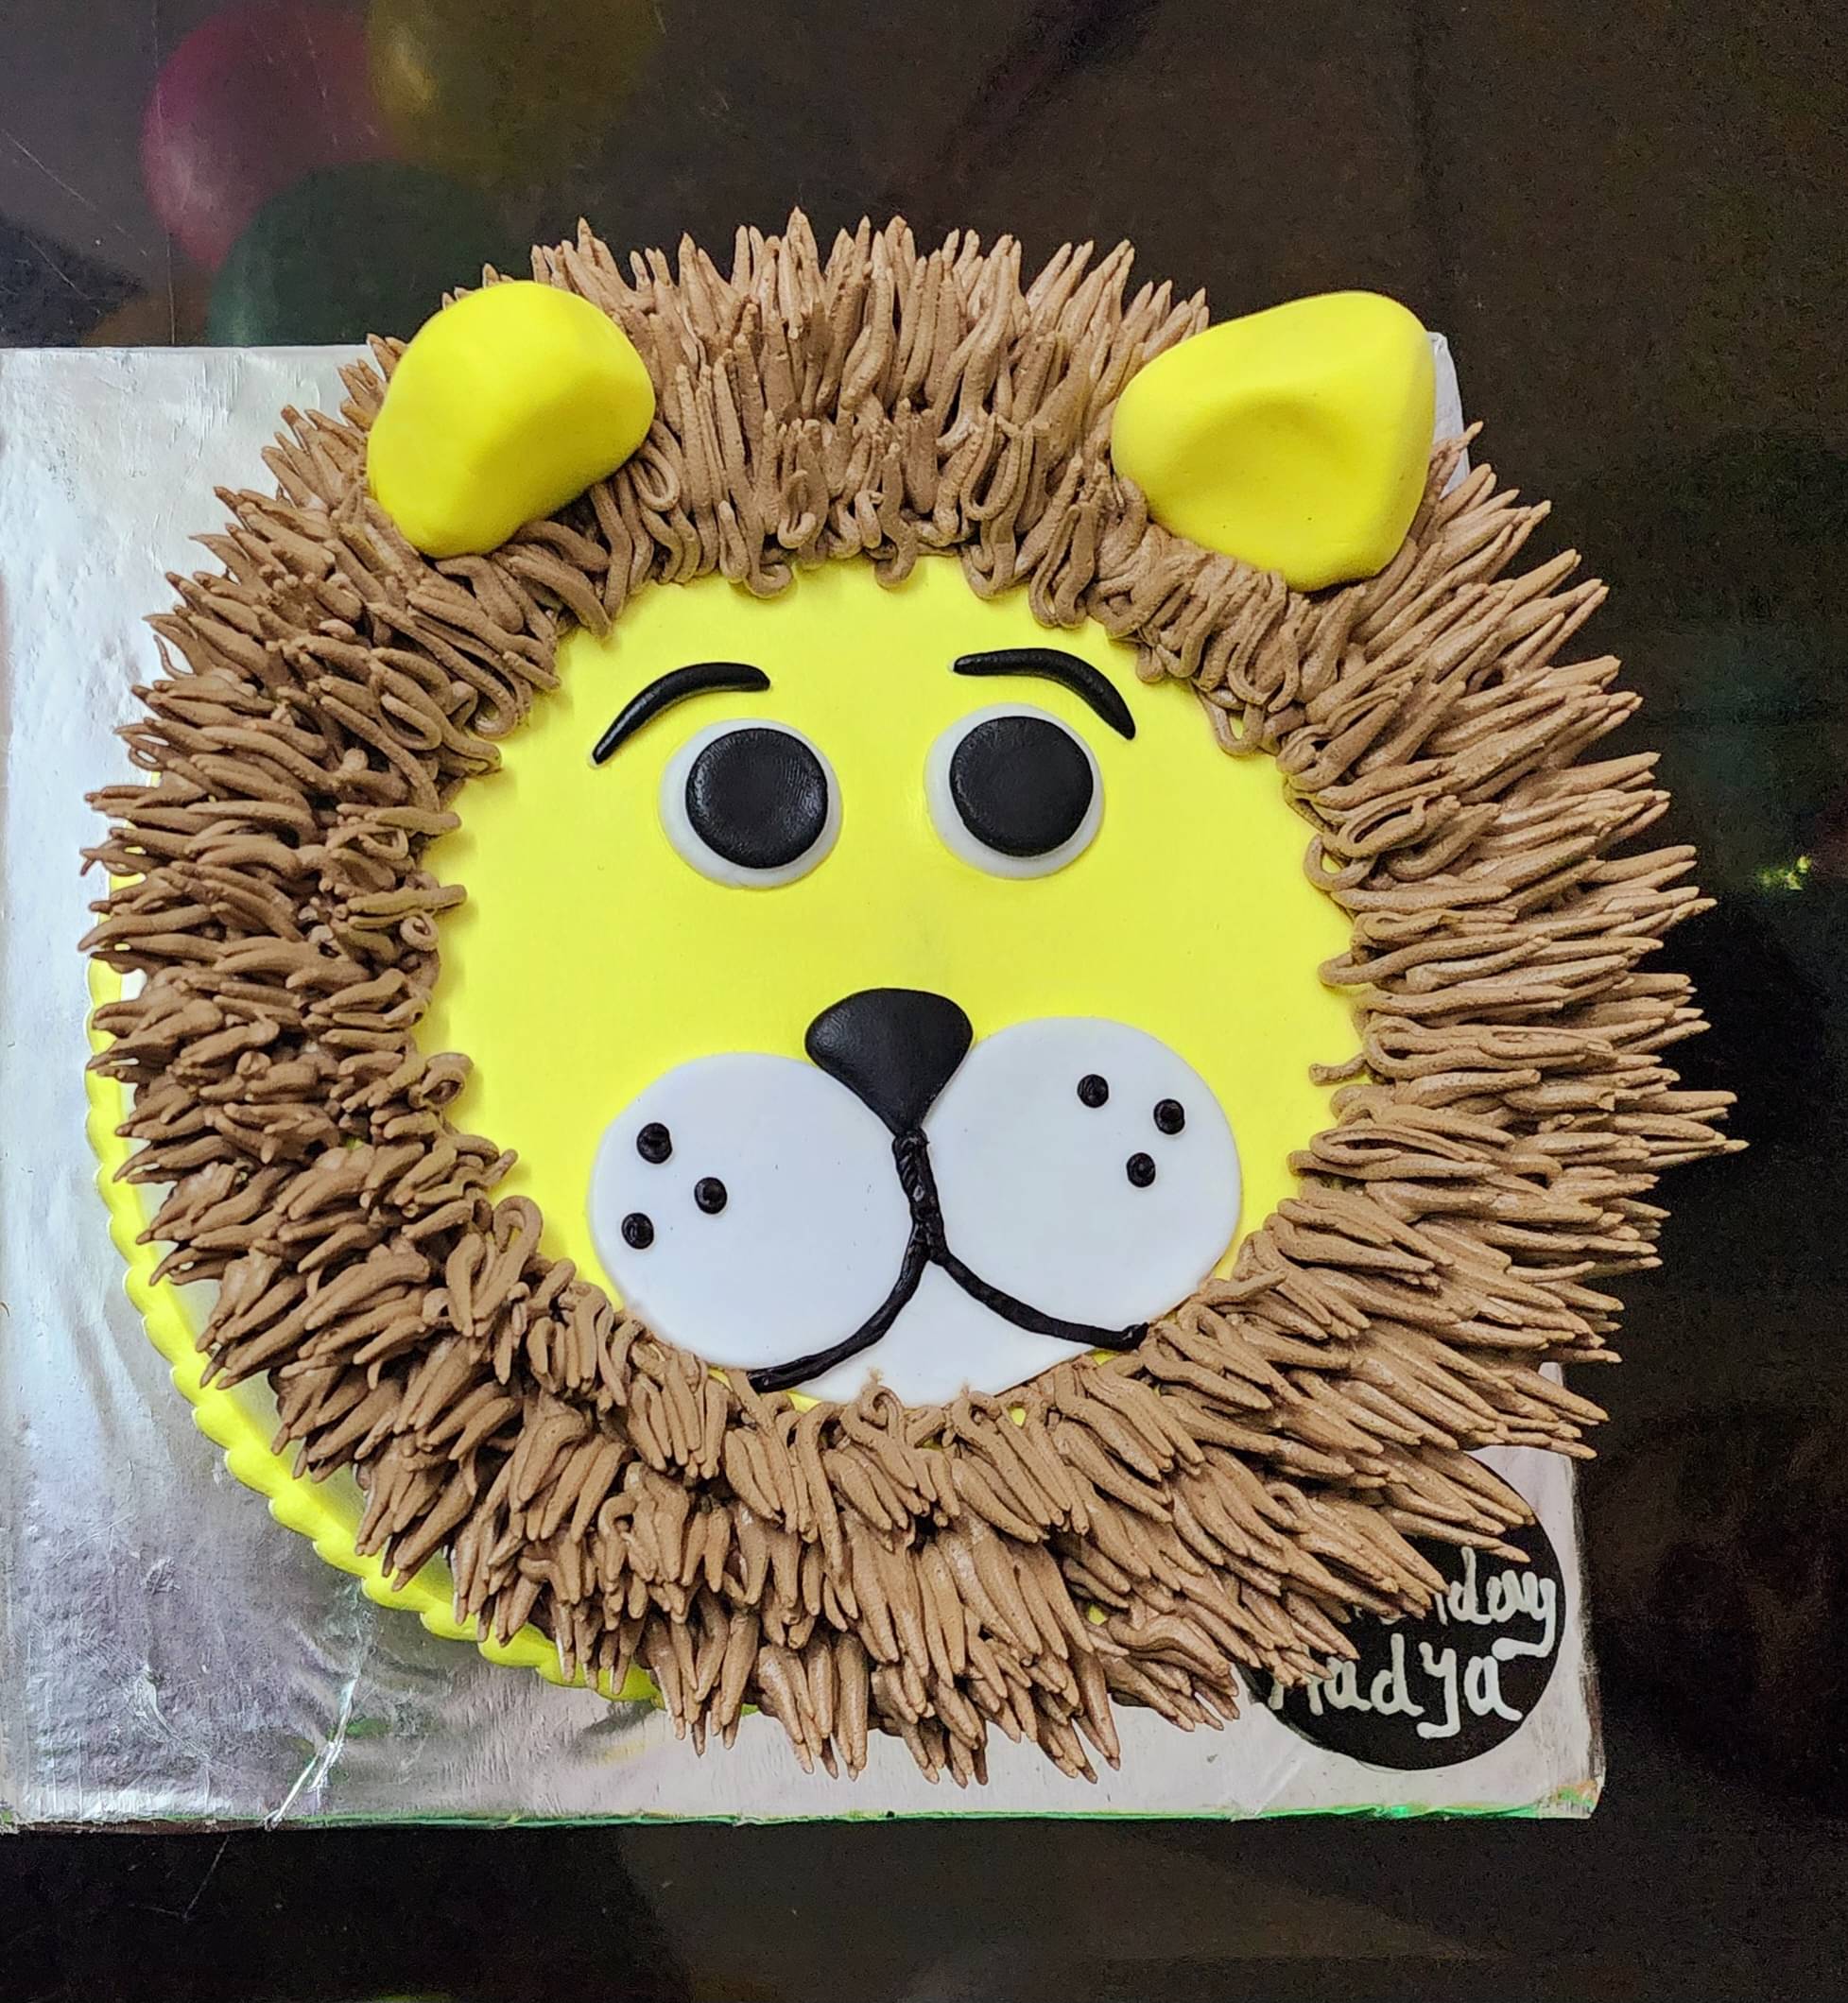 Best Lion Face Theme Cake In Pune | Order Online